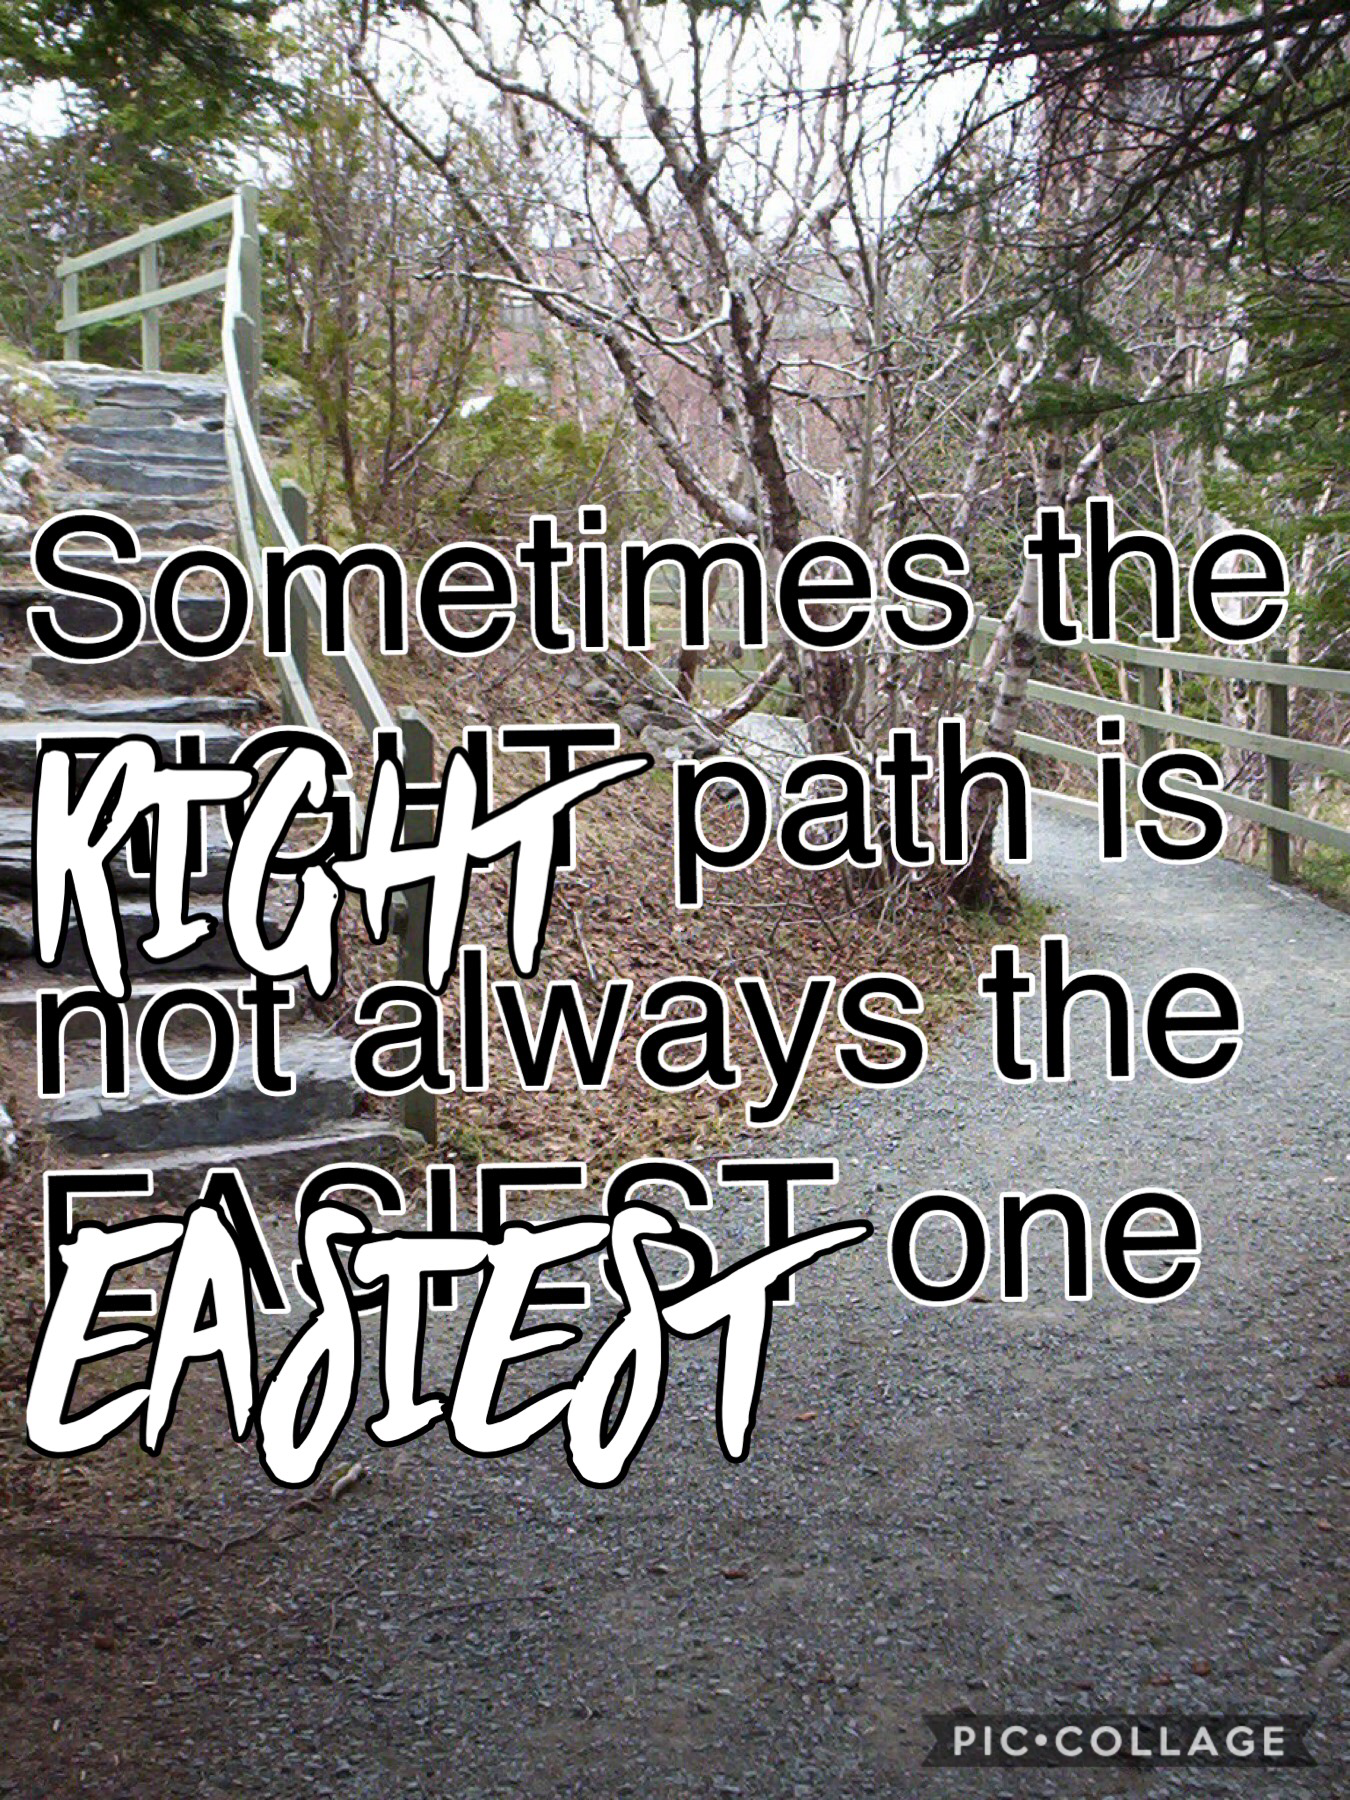 Always chose the right way other than the easiest. It will get you farther in life